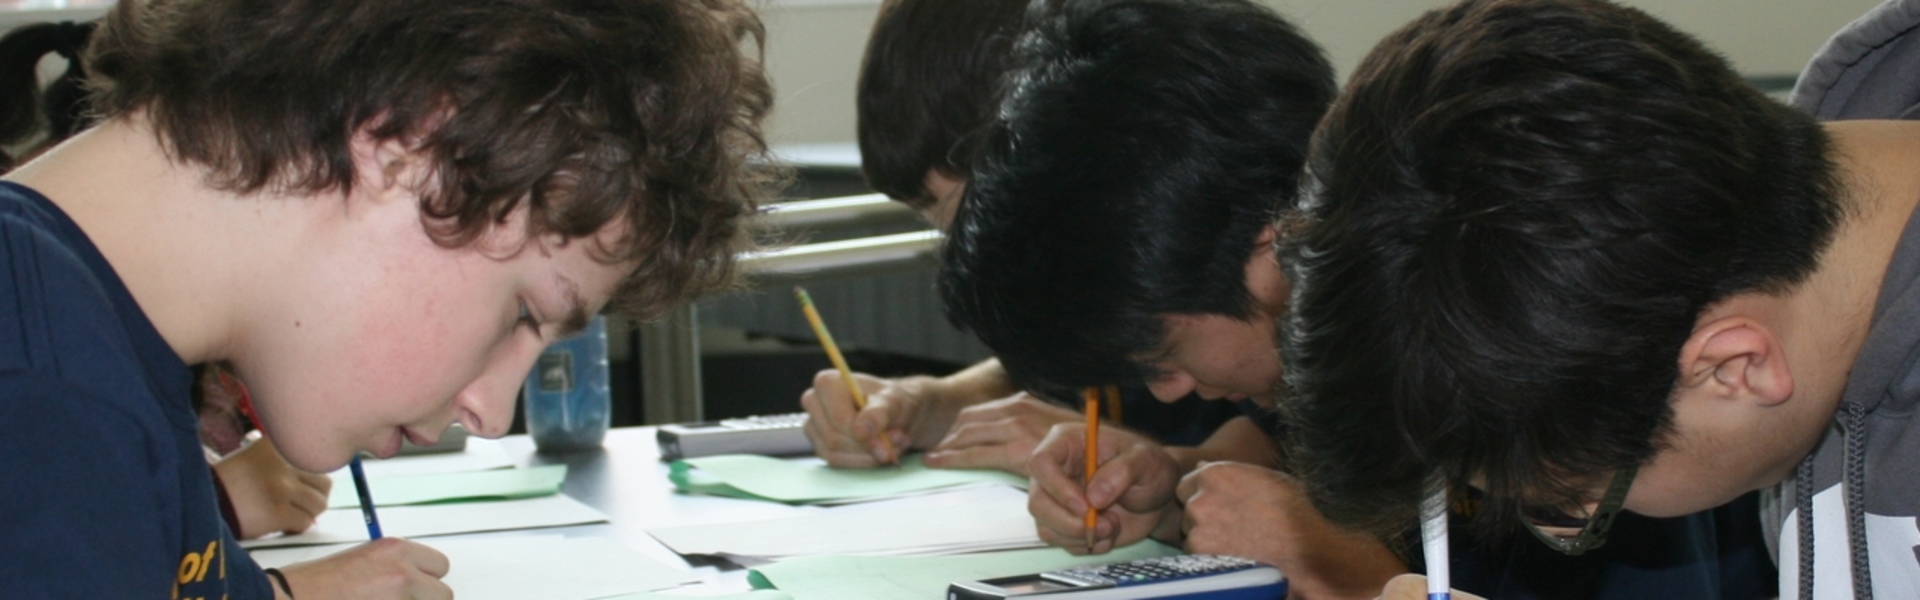 Students working hard on a test